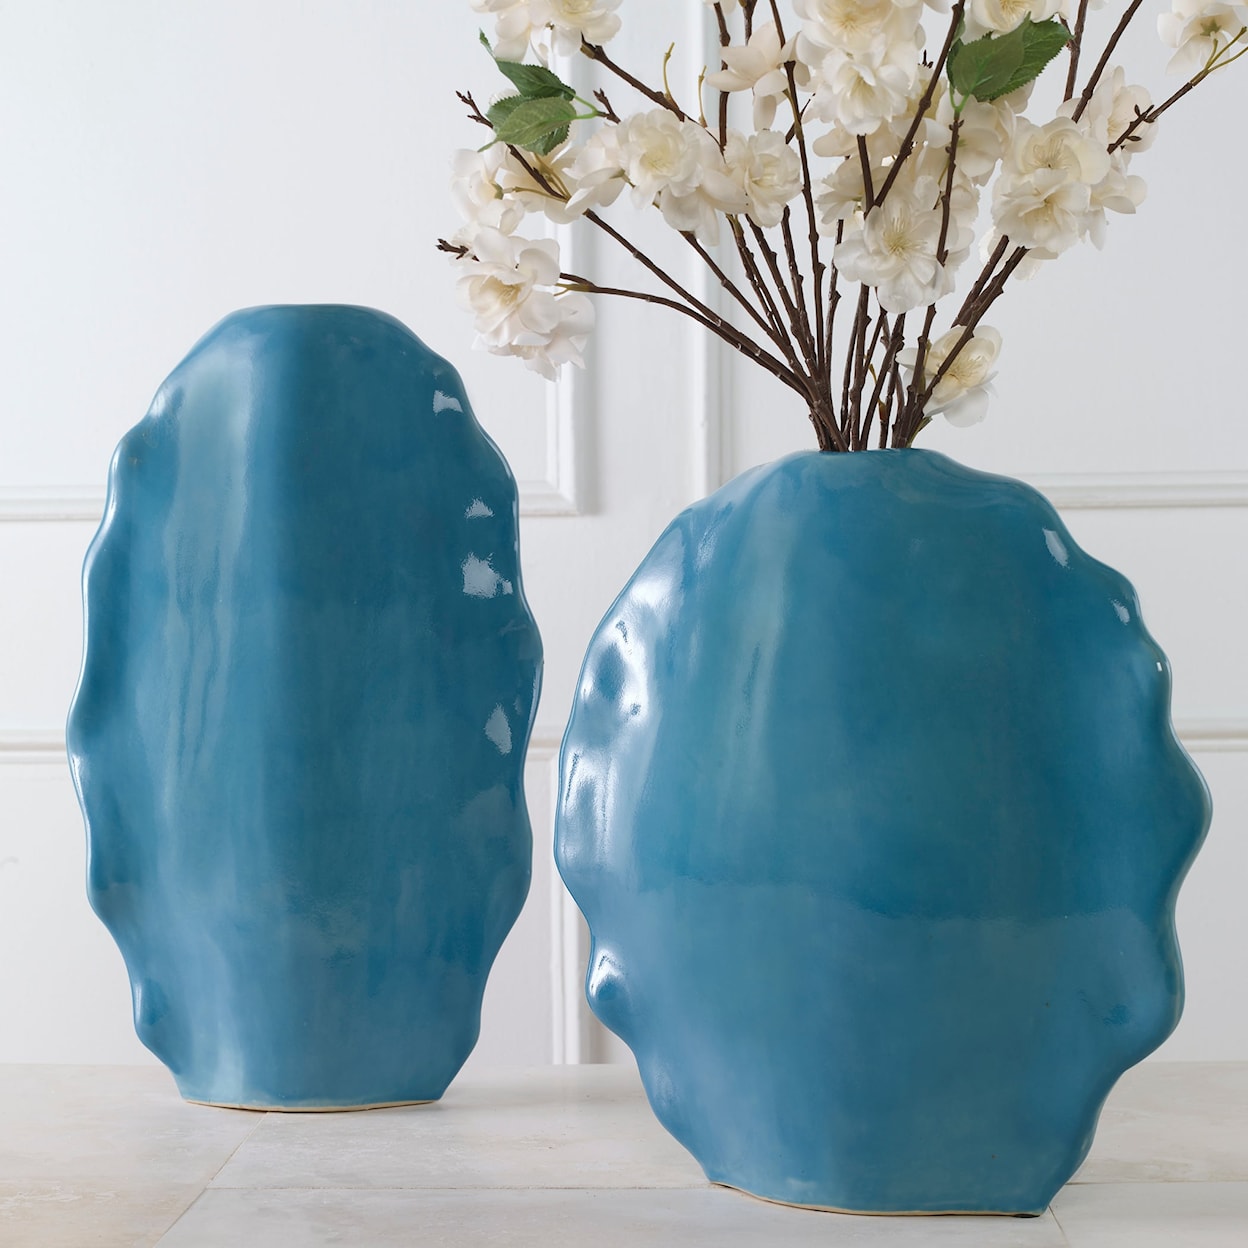 Uttermost Ruffled Feathers Ruffled Feathers Blue Vases S/2